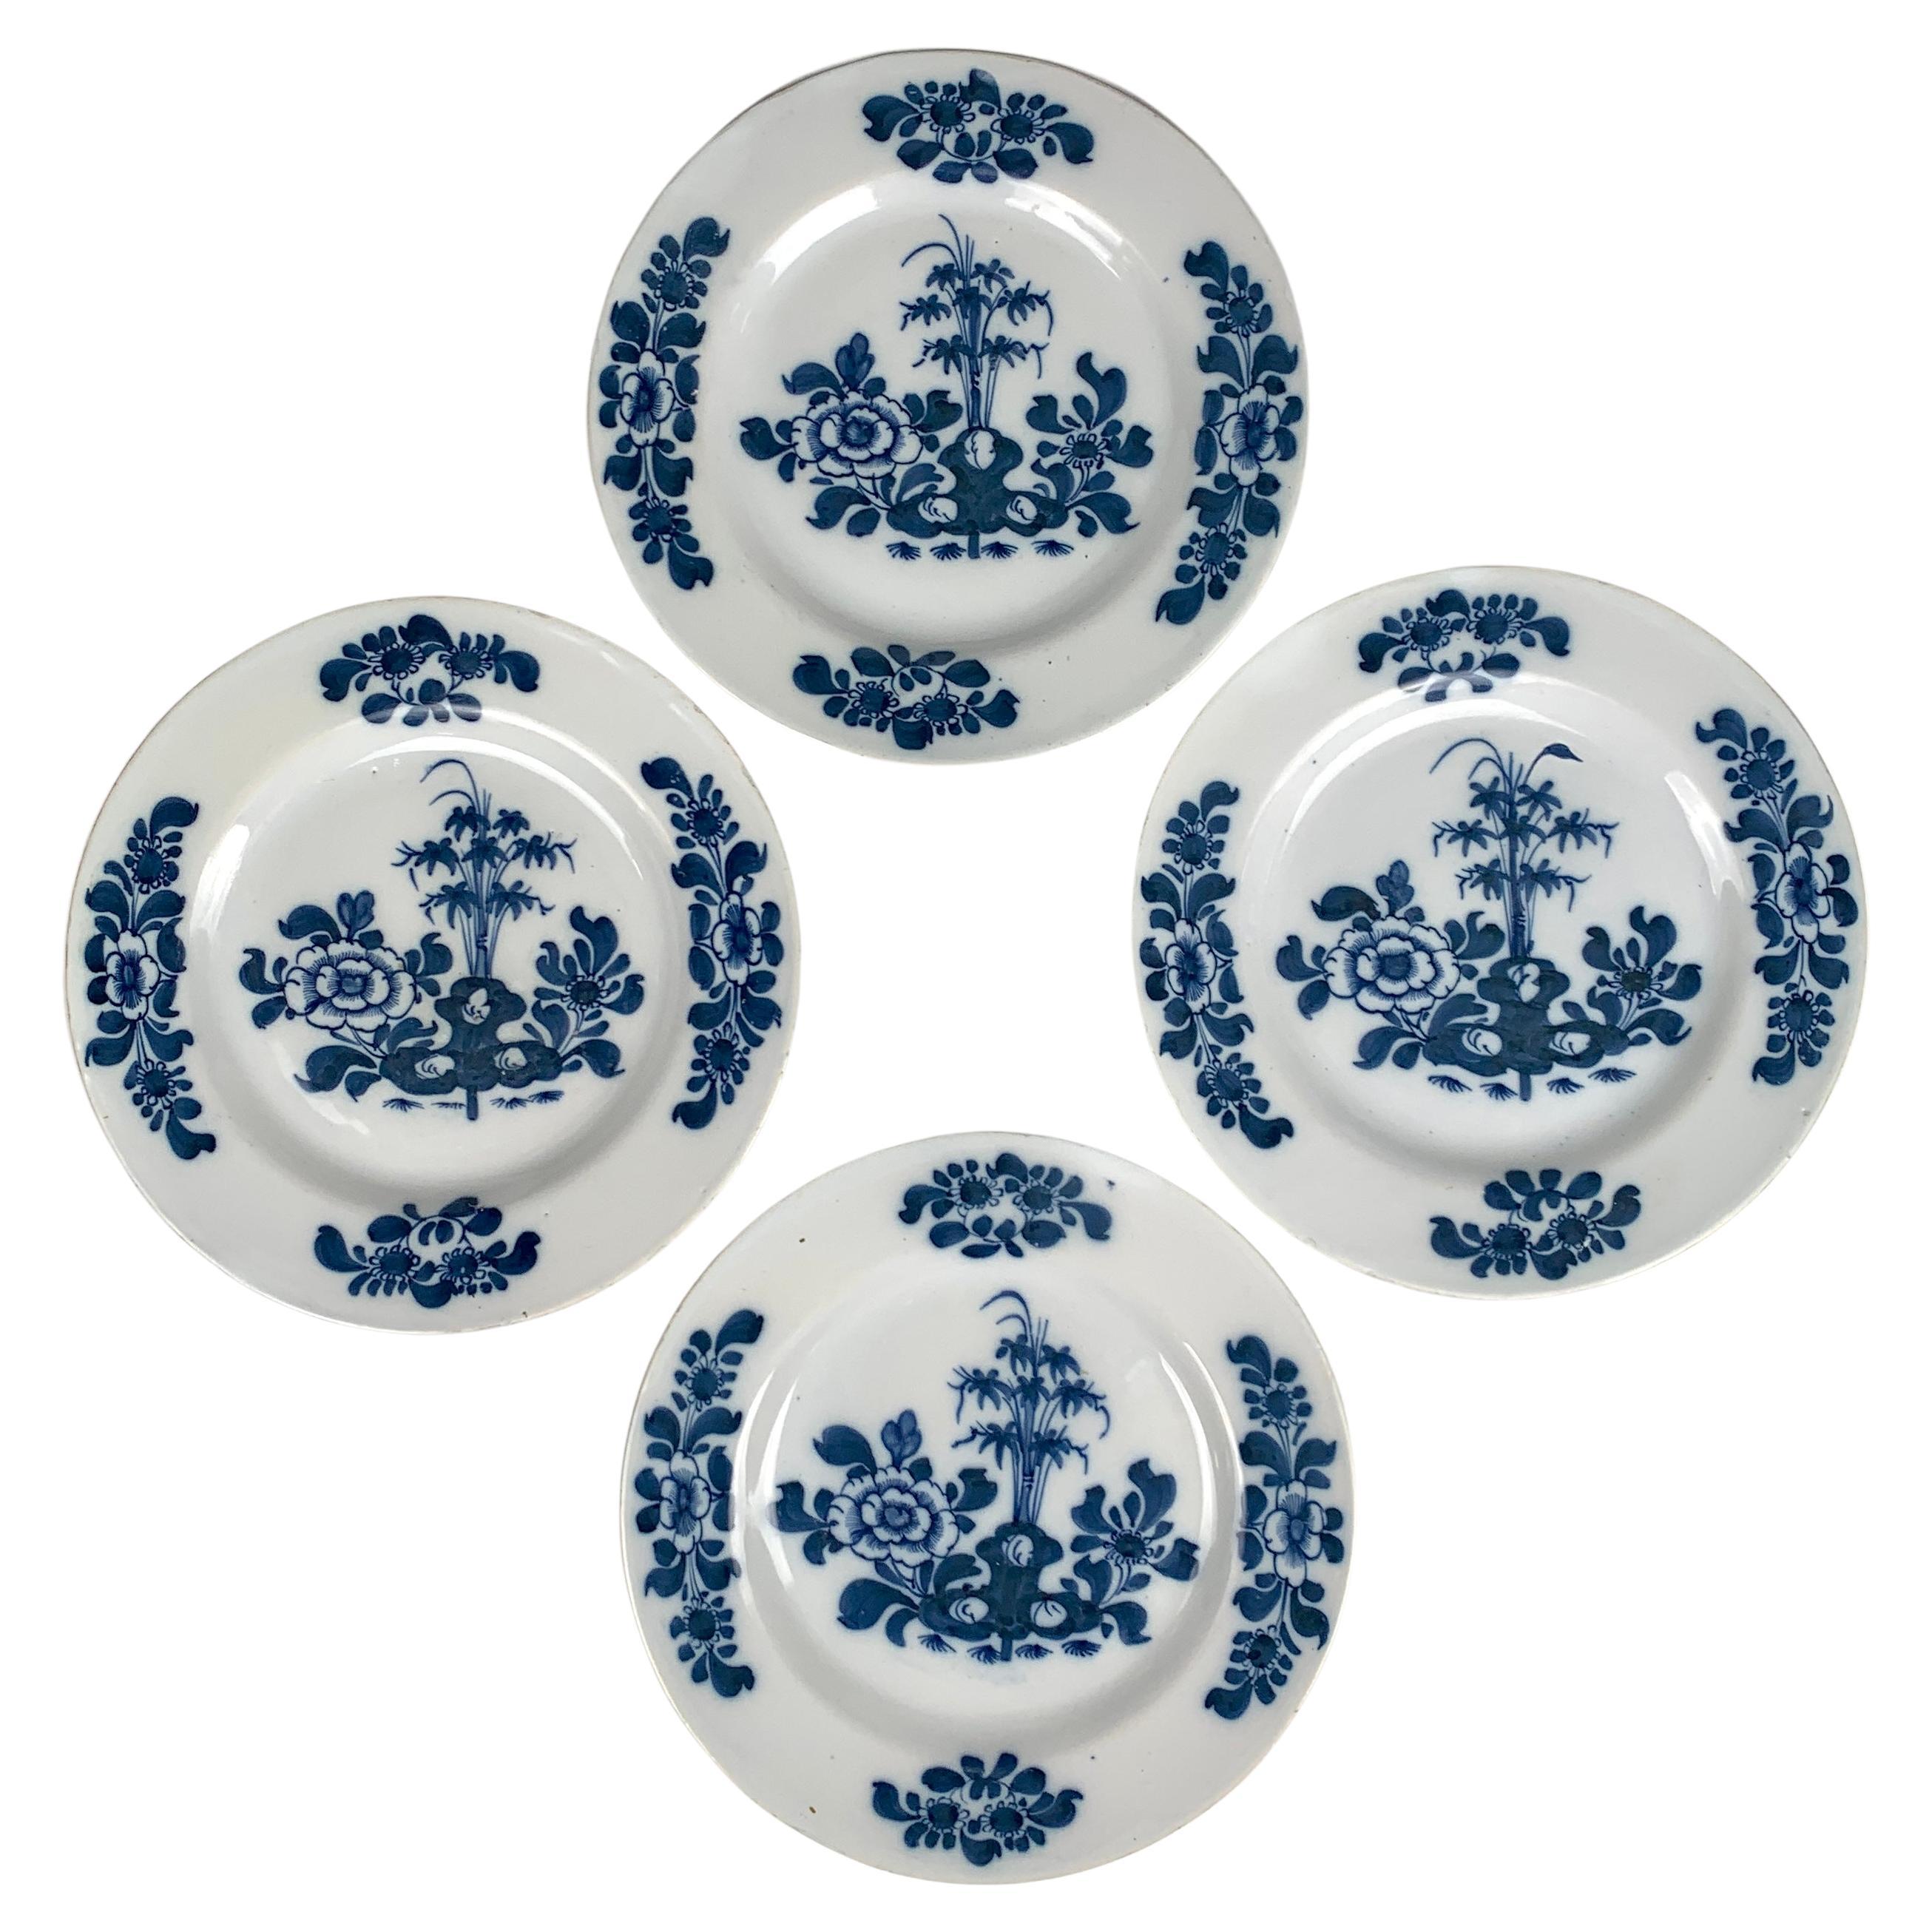 Set of 4 Blue and White Delft Plates or Dishes Hand Painted 18th Century England